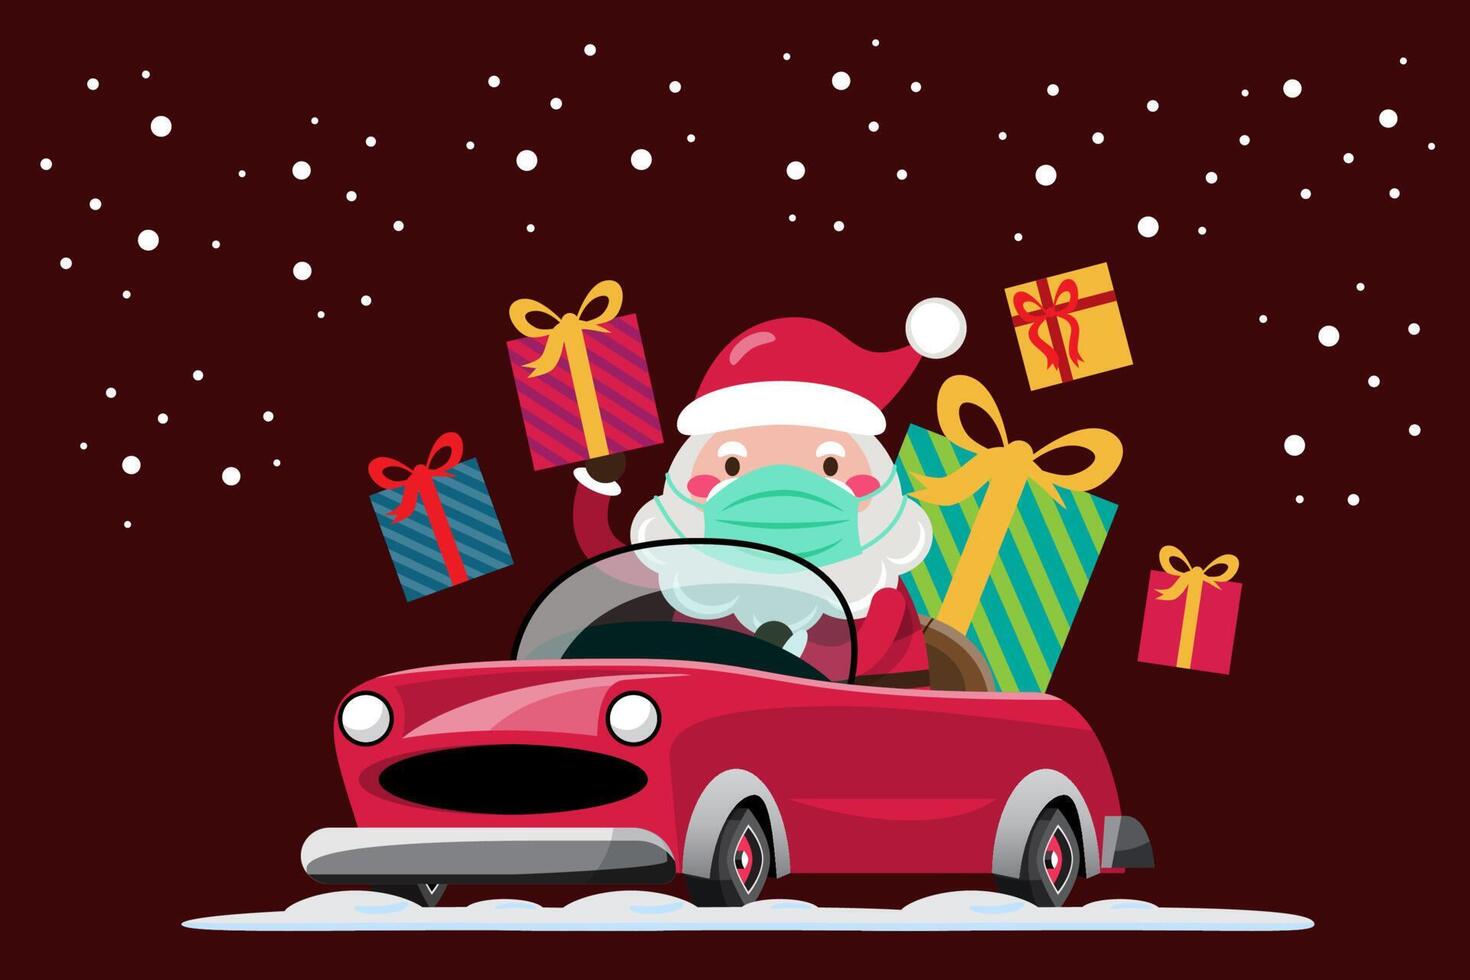 Santa Claus drives a automobile to send Christmas gift to children around the world by wearing mask. vector